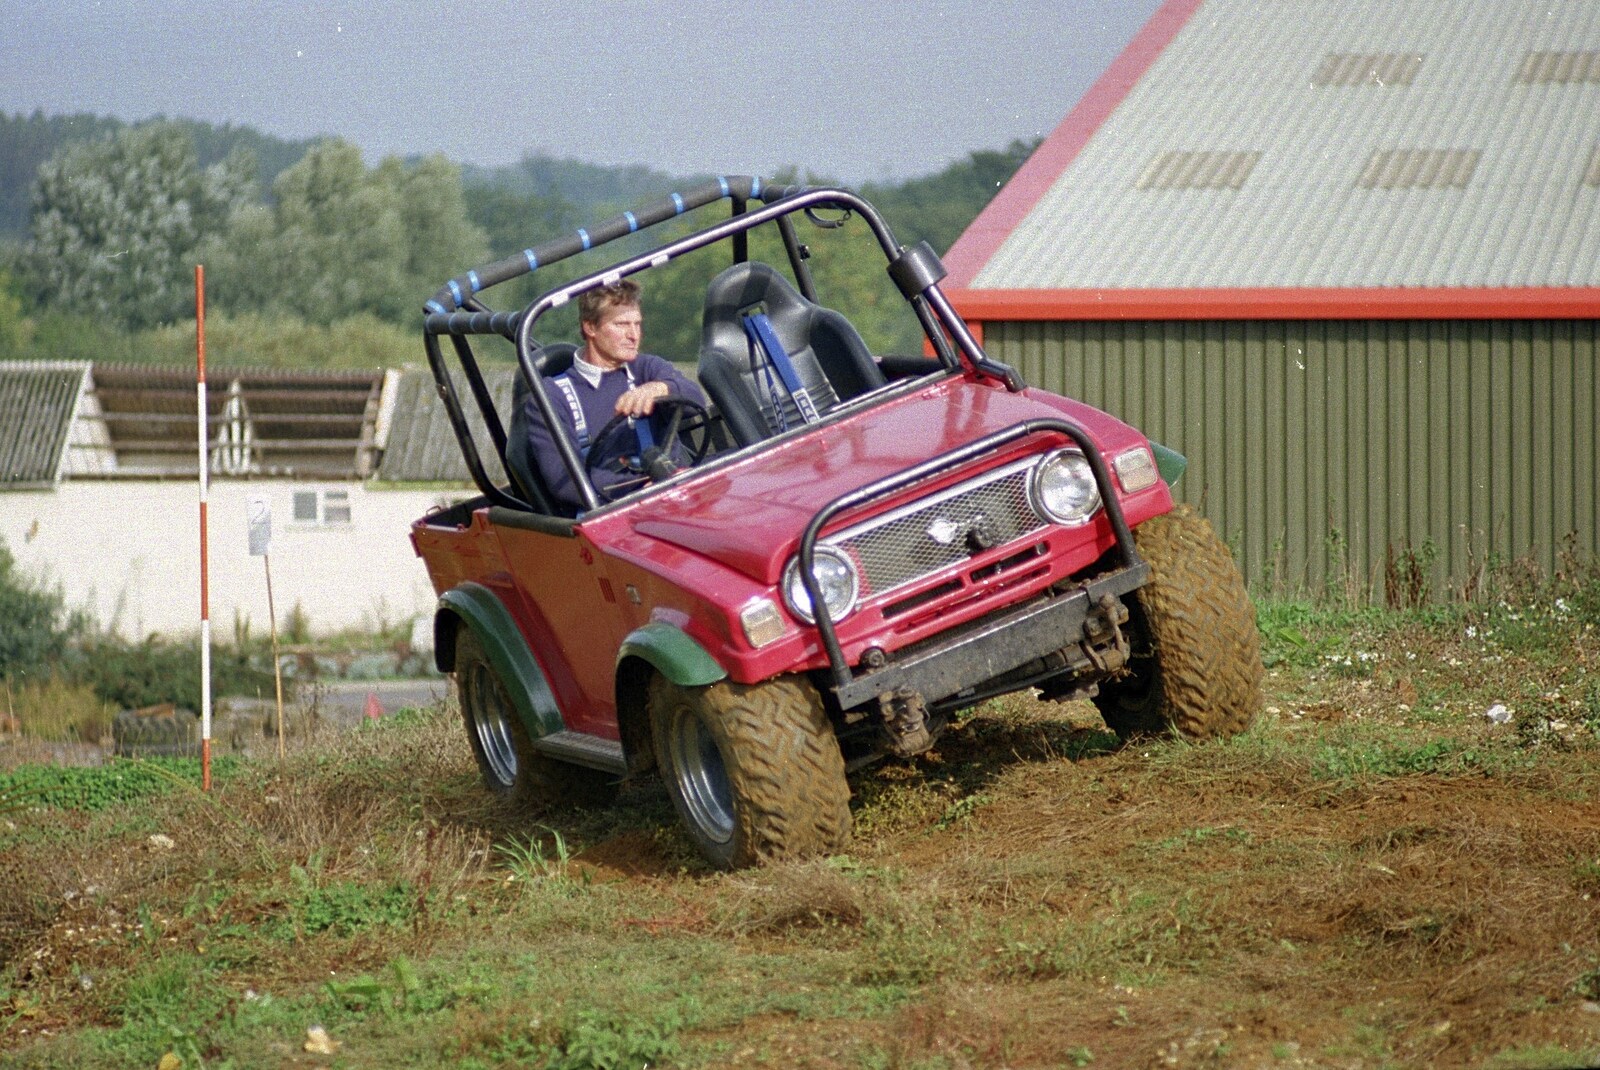 Geoff concentrates as he drives around from Off-roading with Geoff and Brenda, Stuston and Elsewhere, Suffolk - 15th September 1995